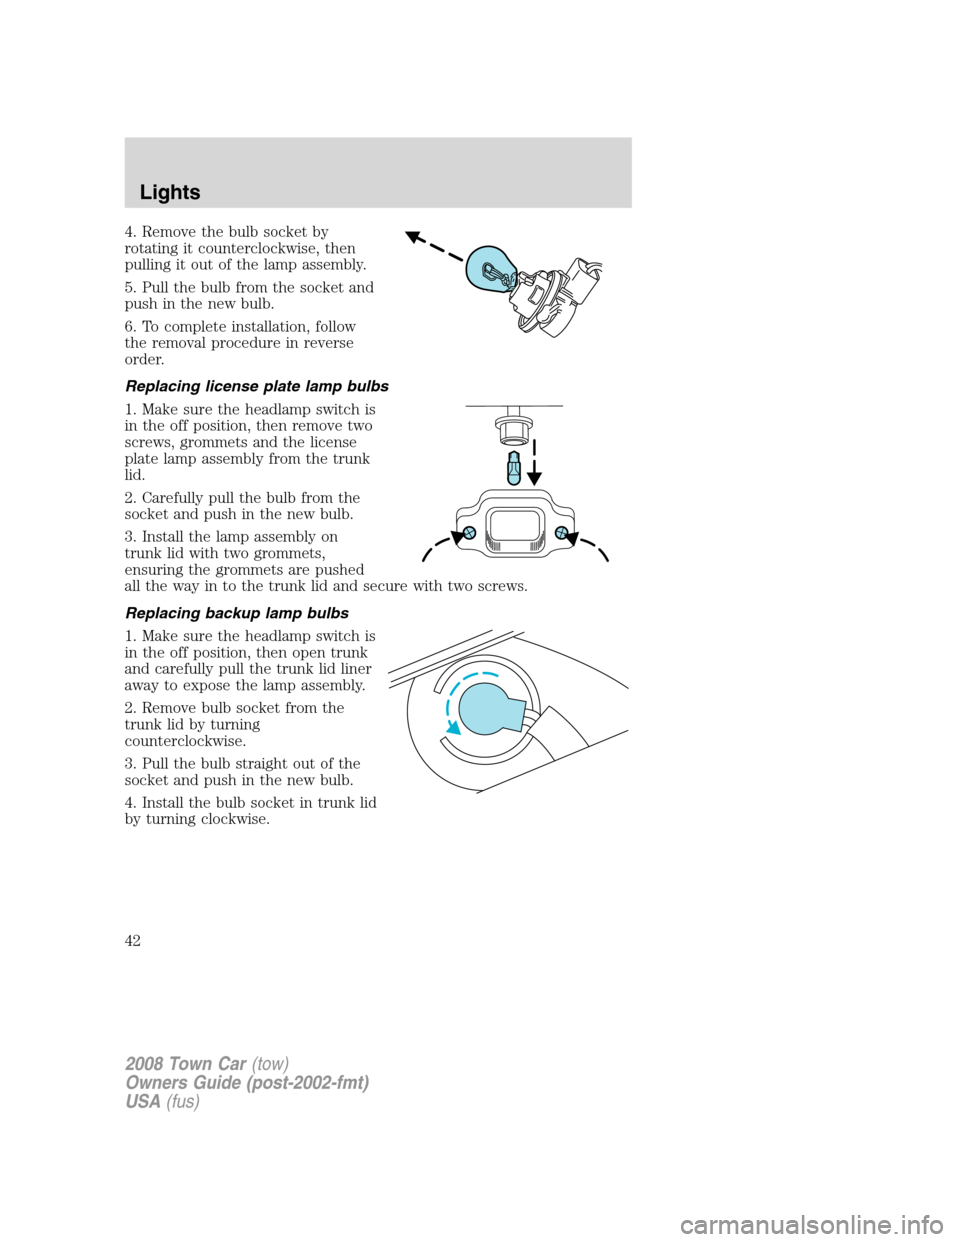 LINCOLN TOWN CAR 2008 Service Manual 4. Remove the bulb socket by
rotating it counterclockwise, then
pulling it out of the lamp assembly.
5. Pull the bulb from the socket and
push in the new bulb.
6. To complete installation, follow
the 